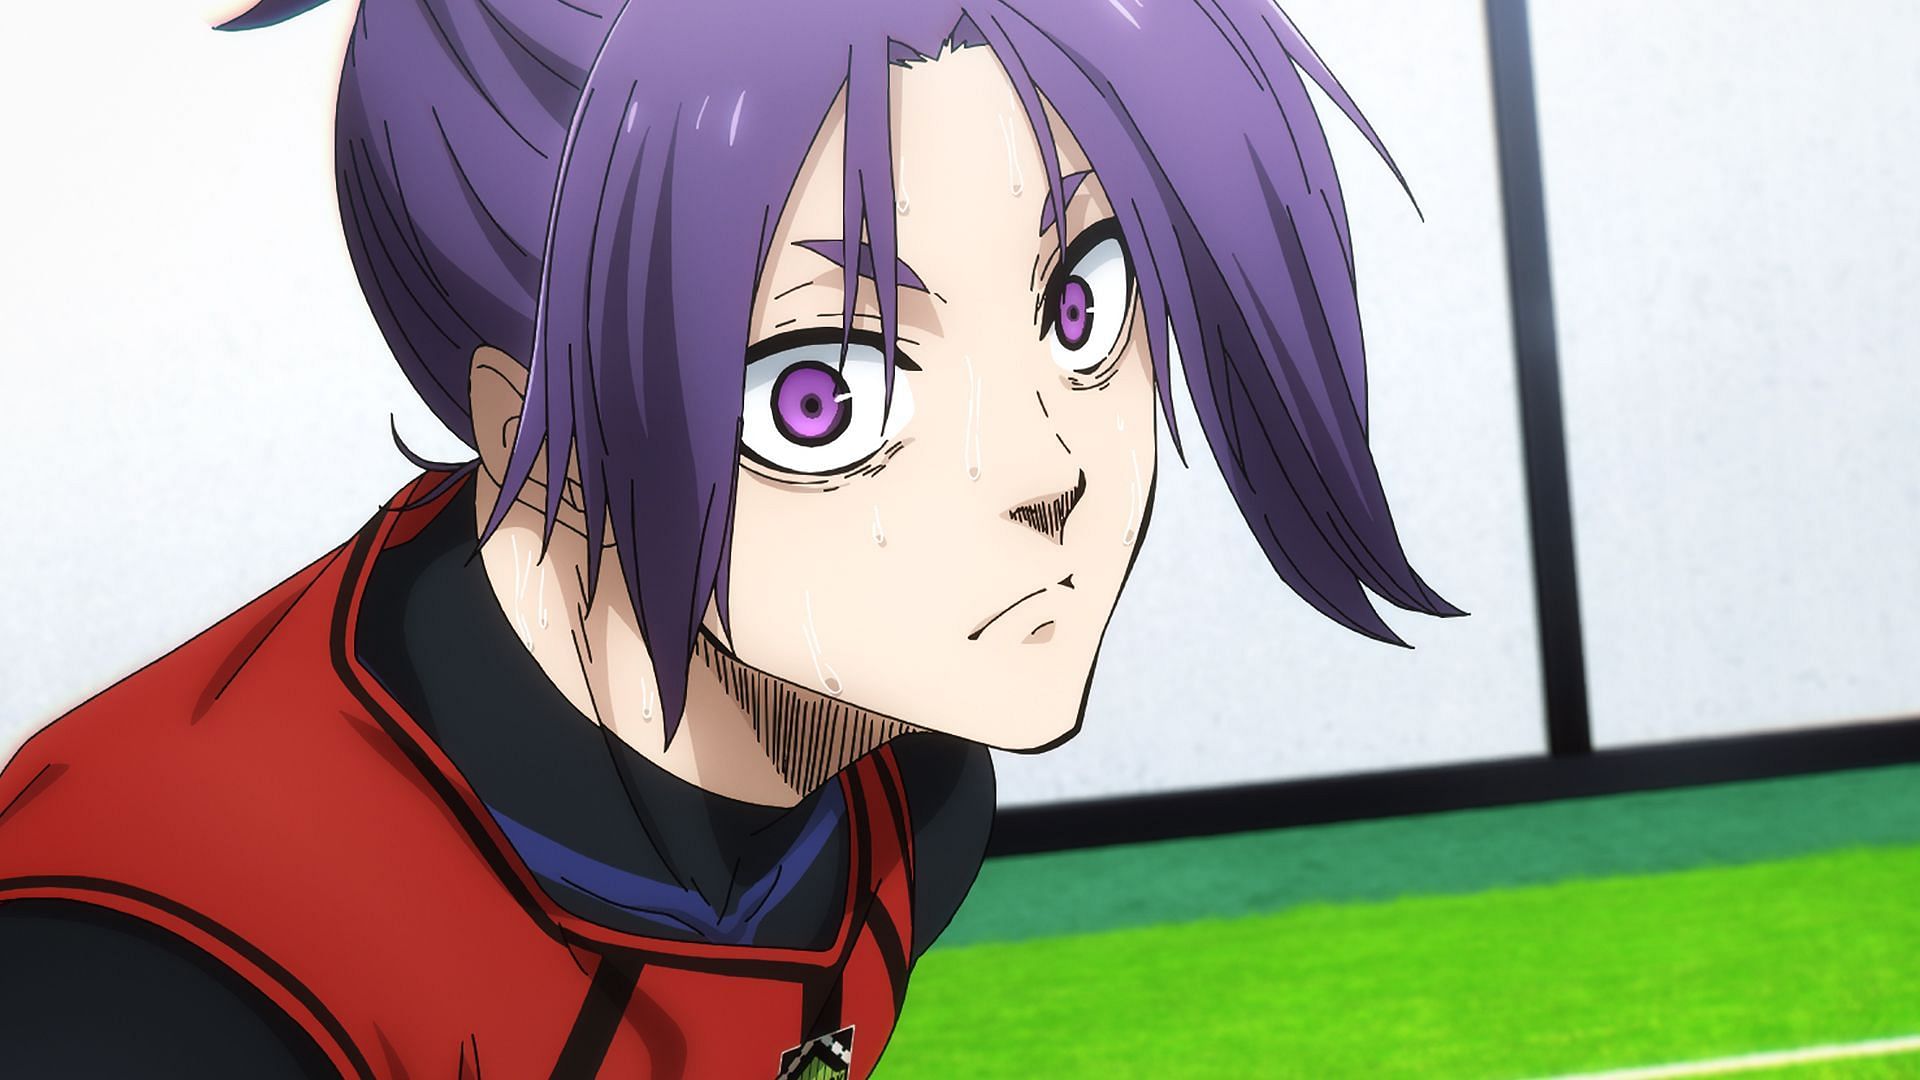 Reo Mikage as seen in Blue Lock episode 17 preview (Image via 8bit)